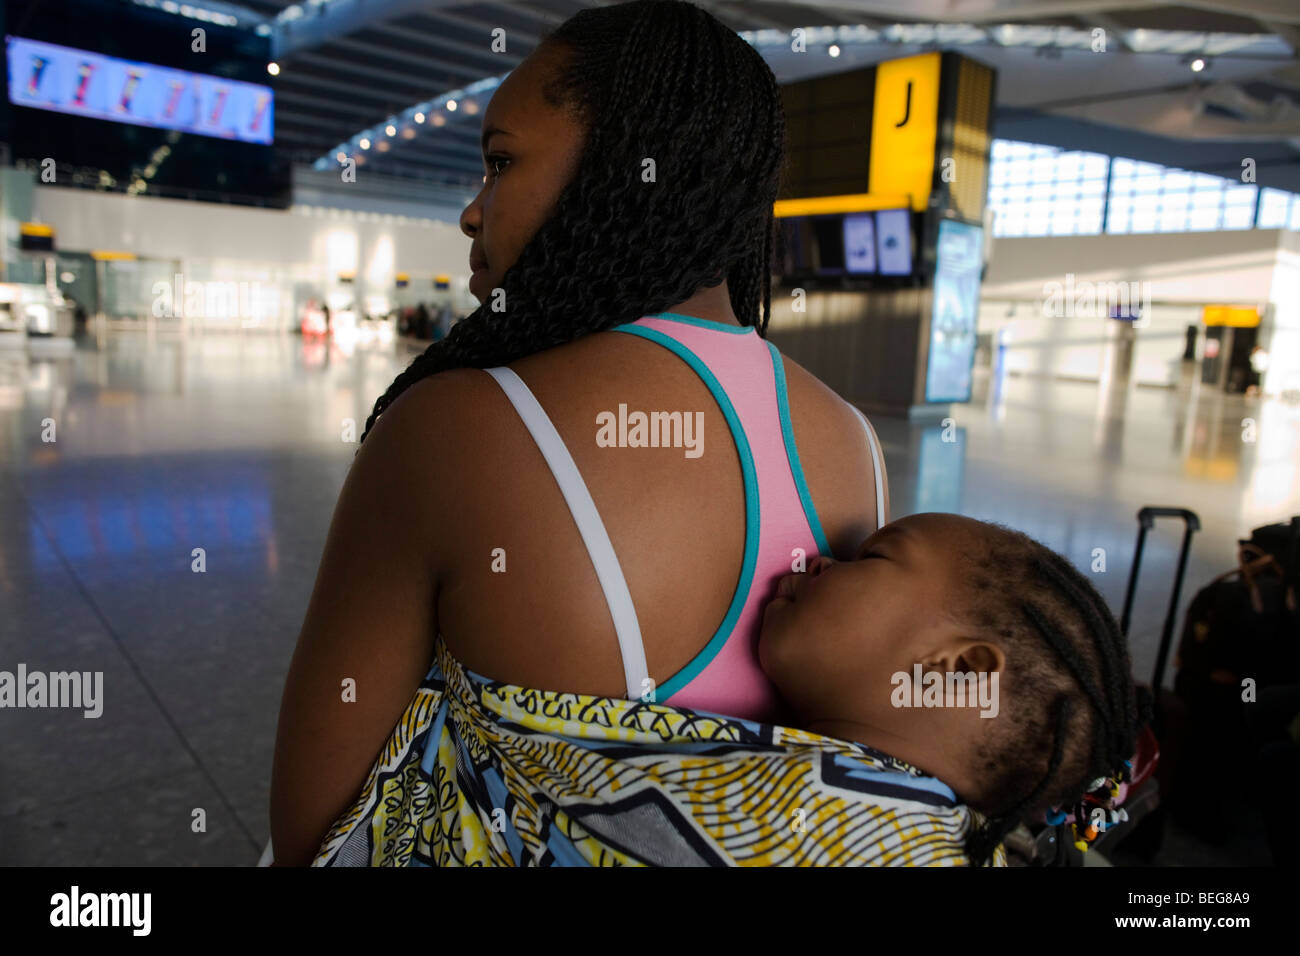 A young African mother allows her sleeping baby some well-earned rest on her back at Heathrow Airport's Terminal 5. Stock Photo